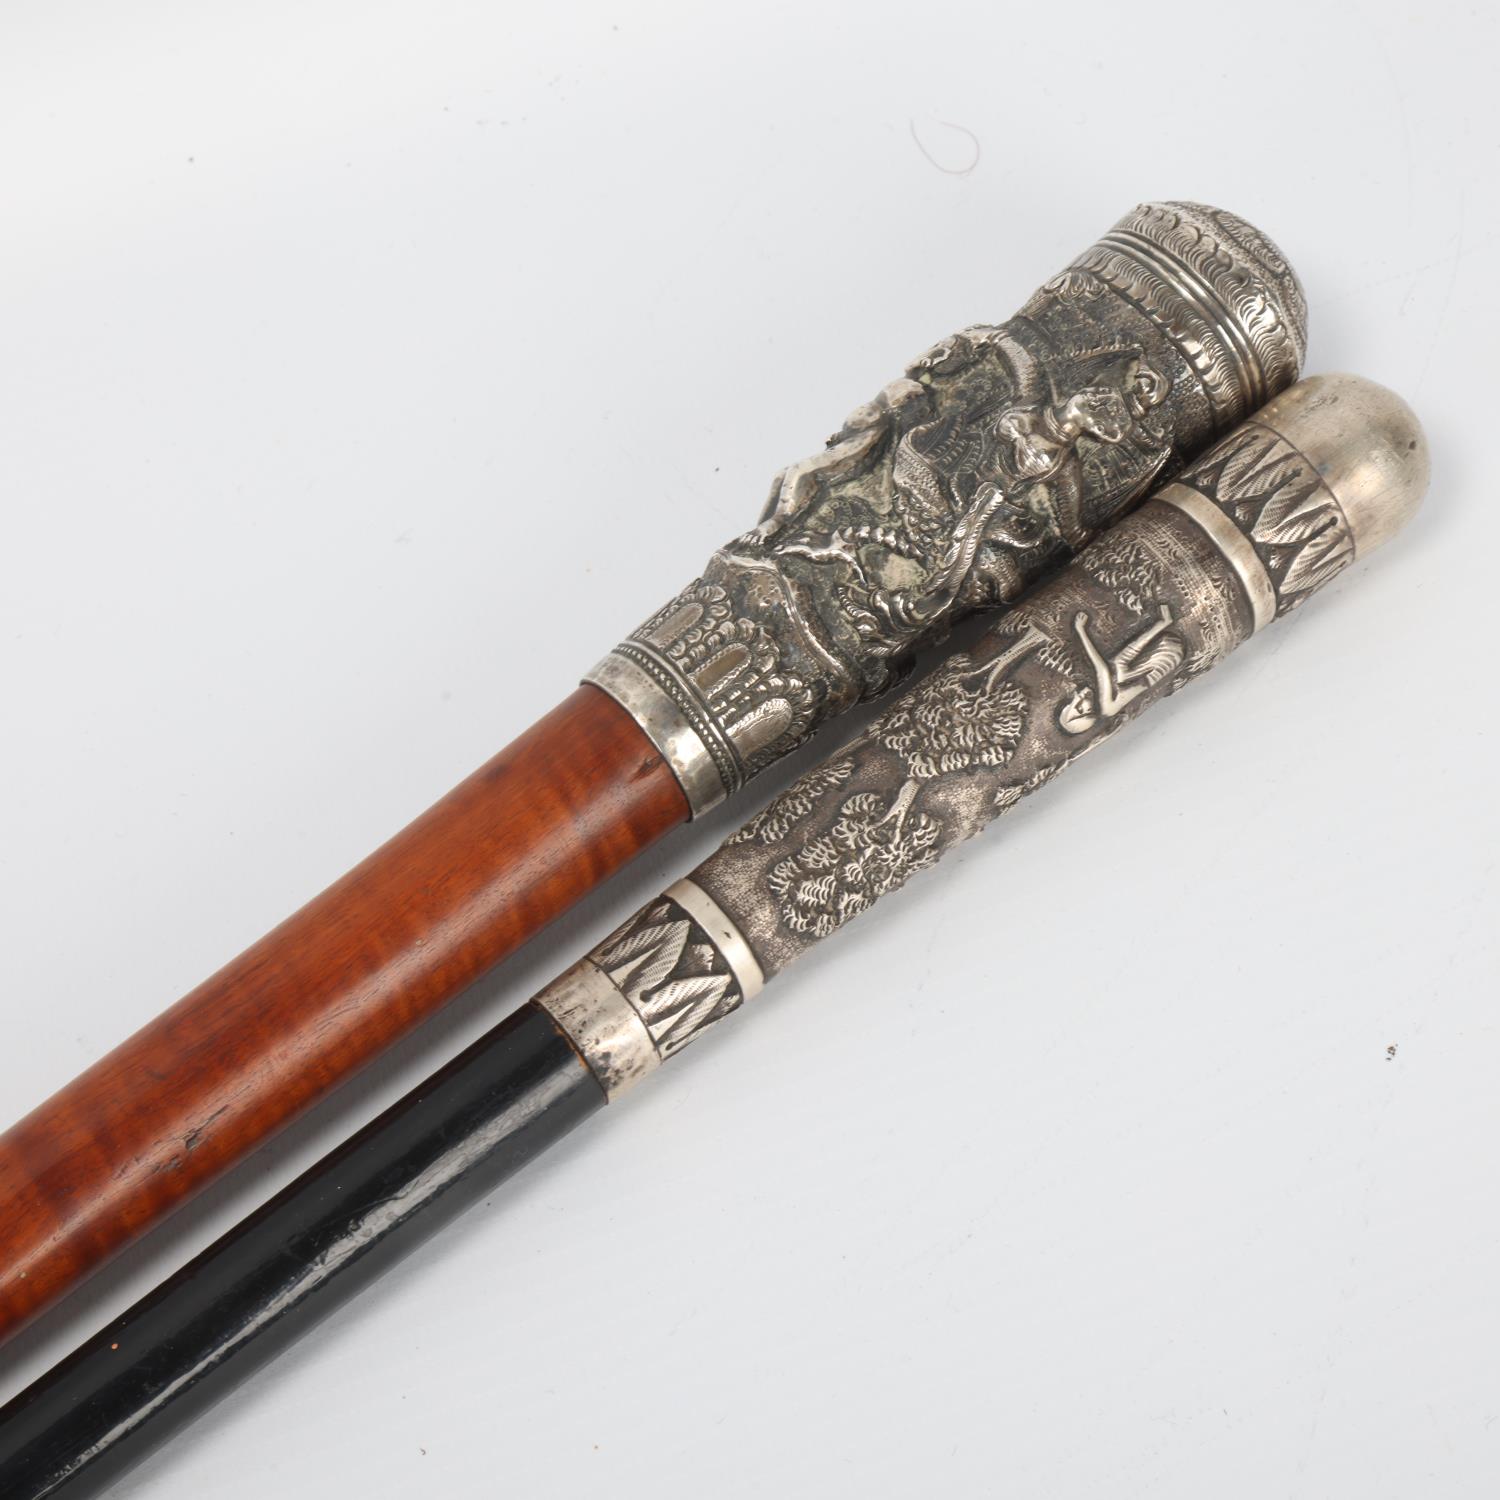 2 x 19th century Indian unmarked silver-handled walking canes, with relief cast handles, lengths - Image 3 of 3